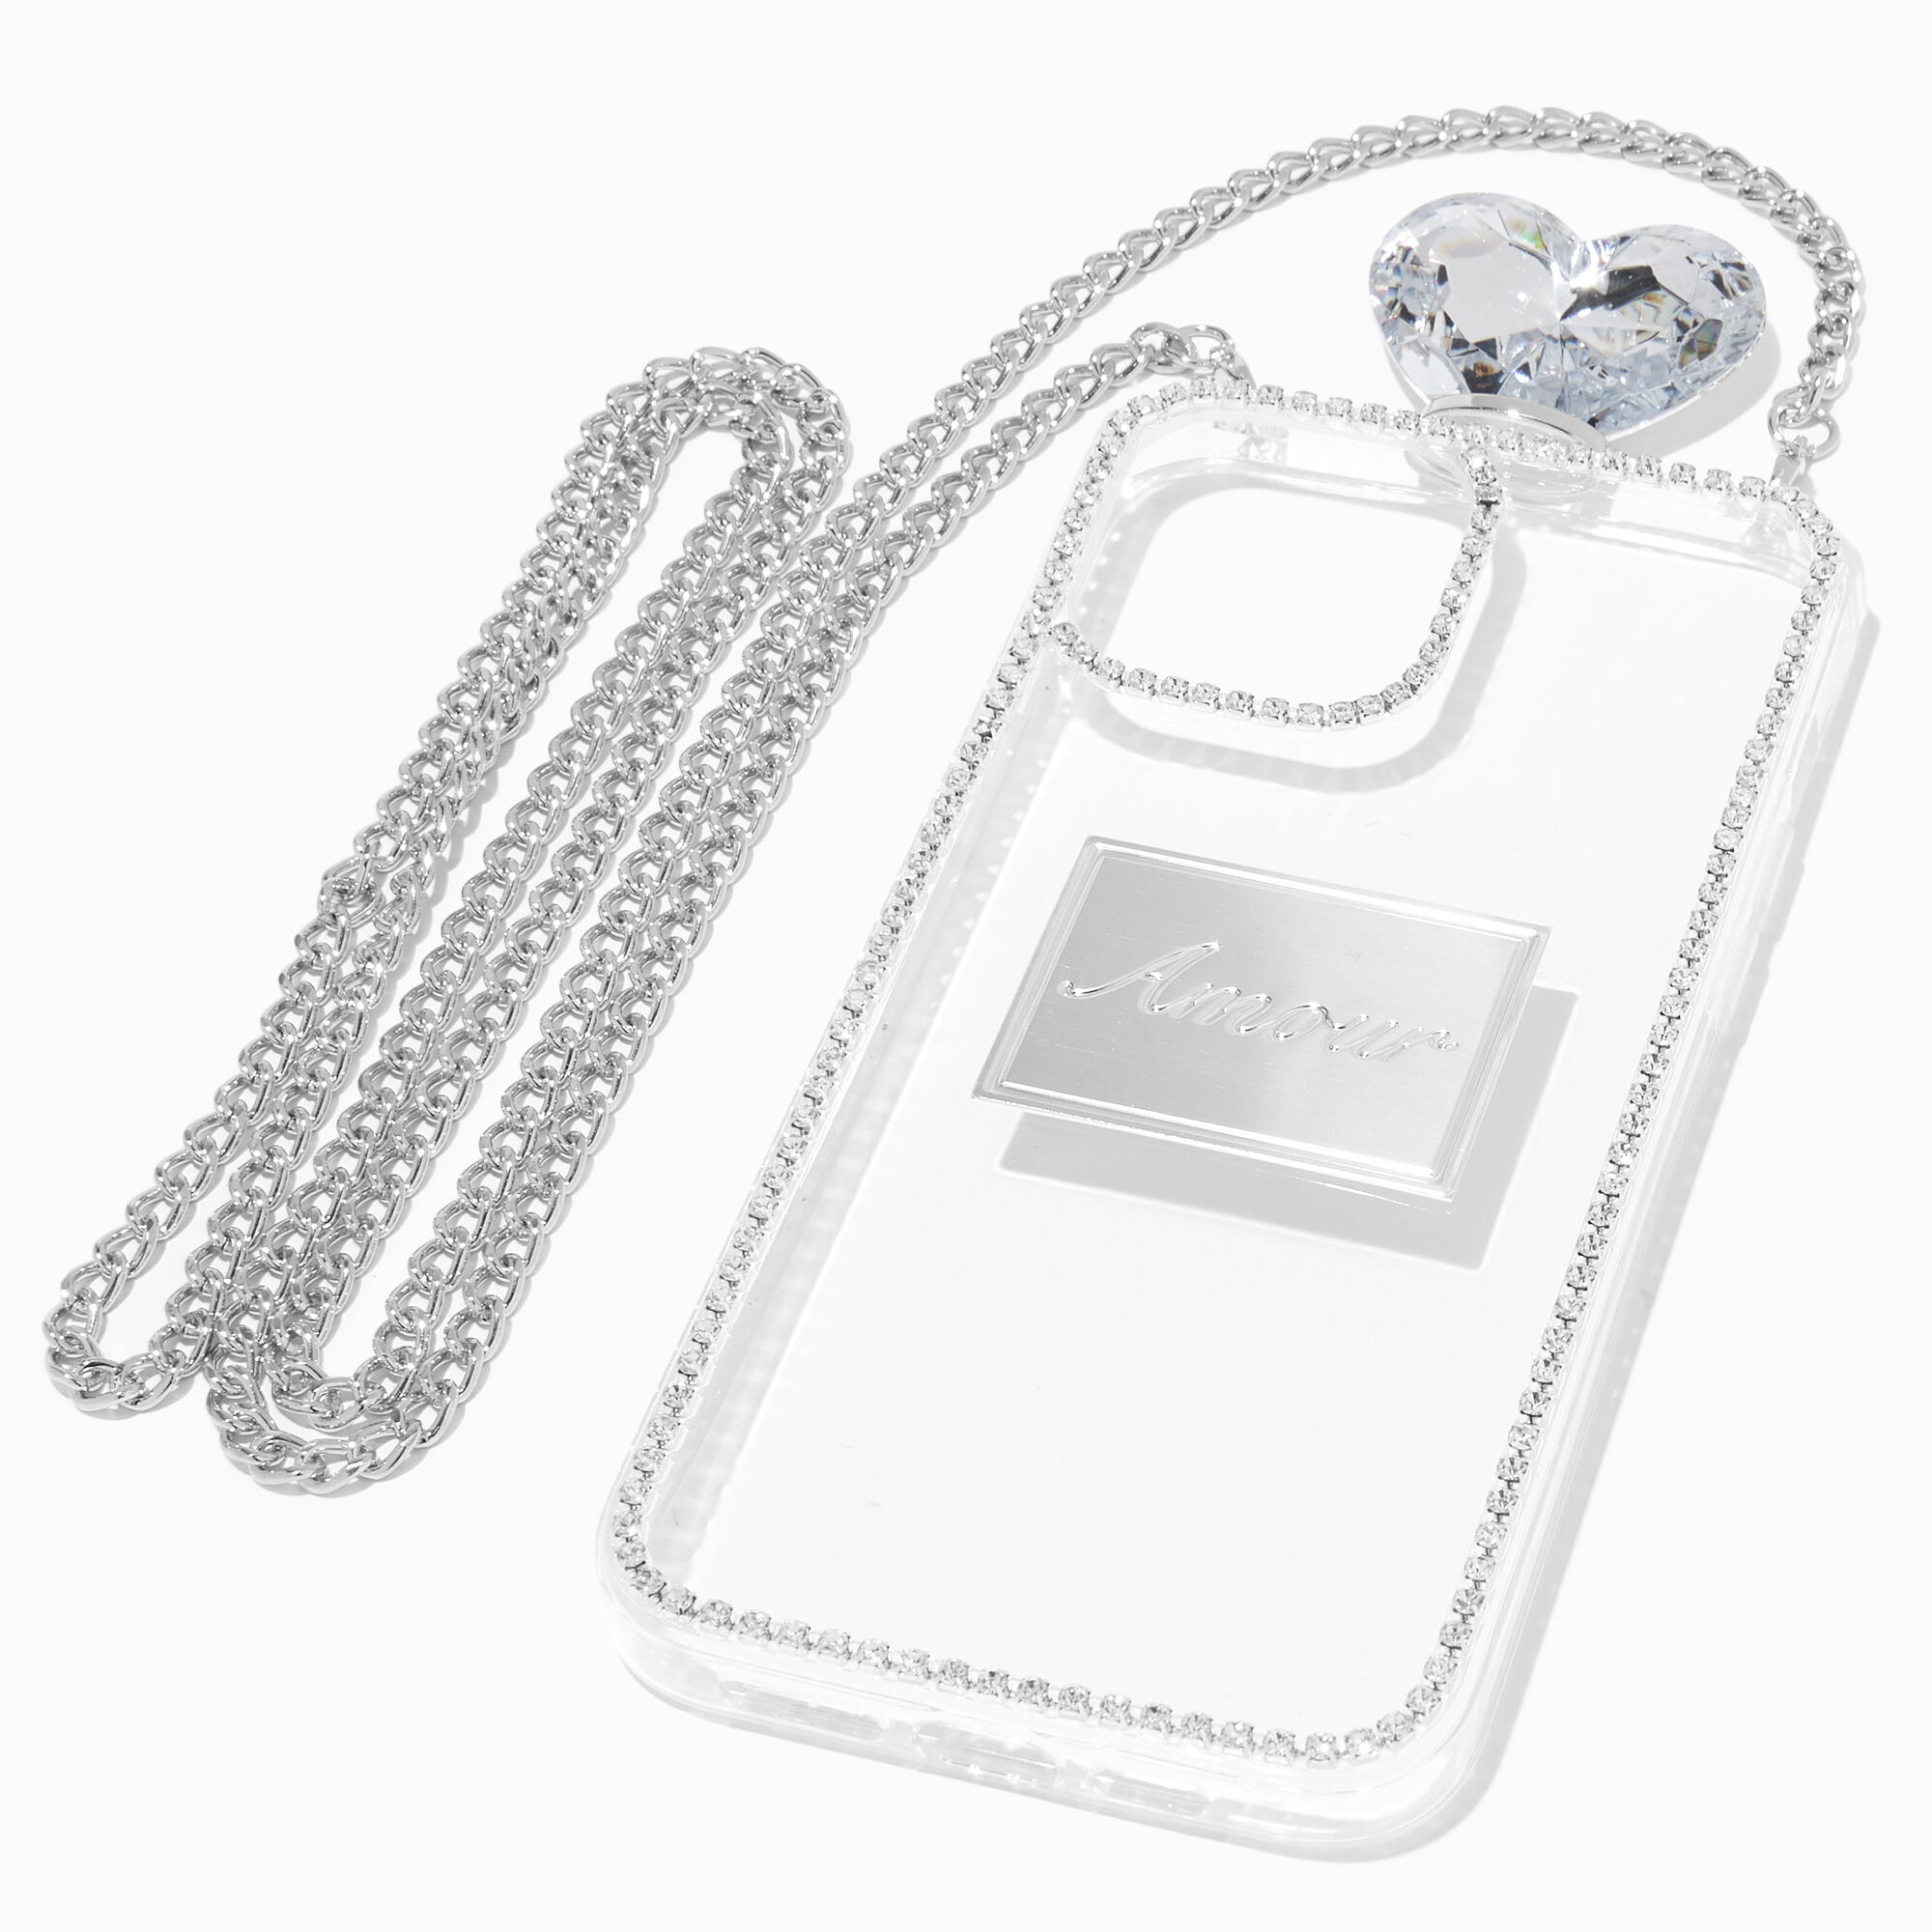 Luxury Perfume Bottle Design 3D Diamond Handmade Phone TPU Soft Cases For  iPhone 14 12 13 Pro XS Max Cover With Metal Chain